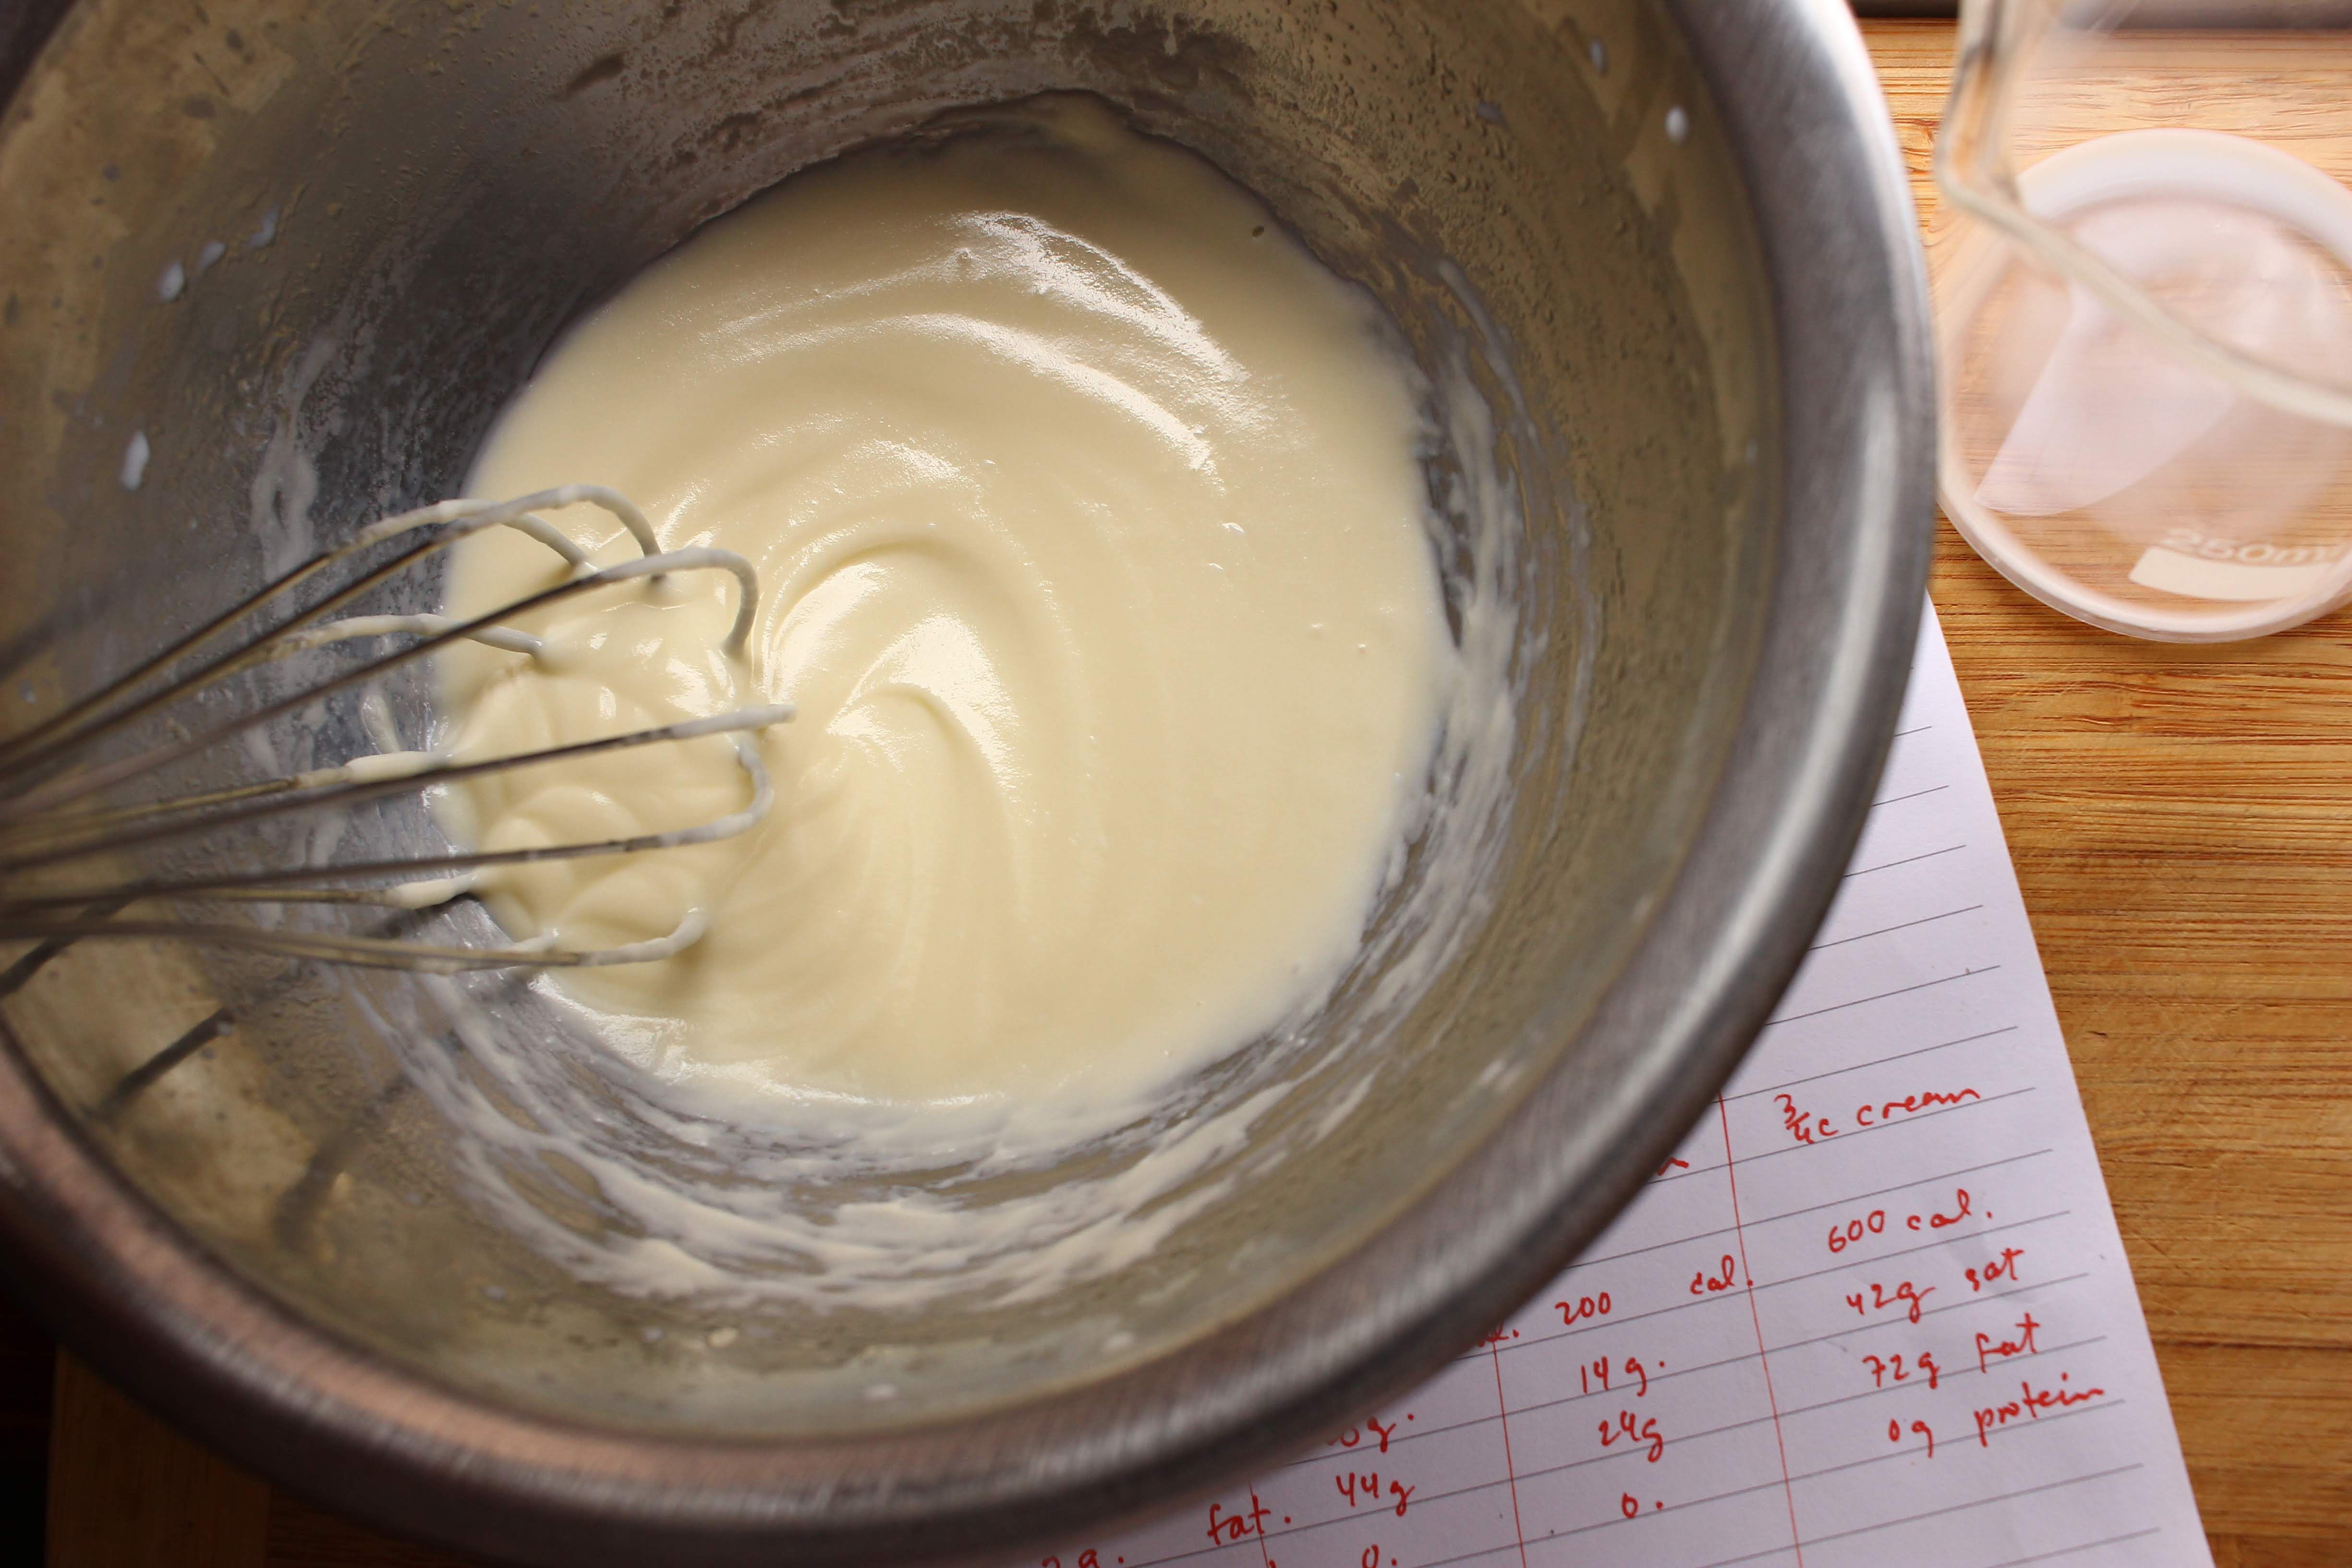 substitution for heavy cream